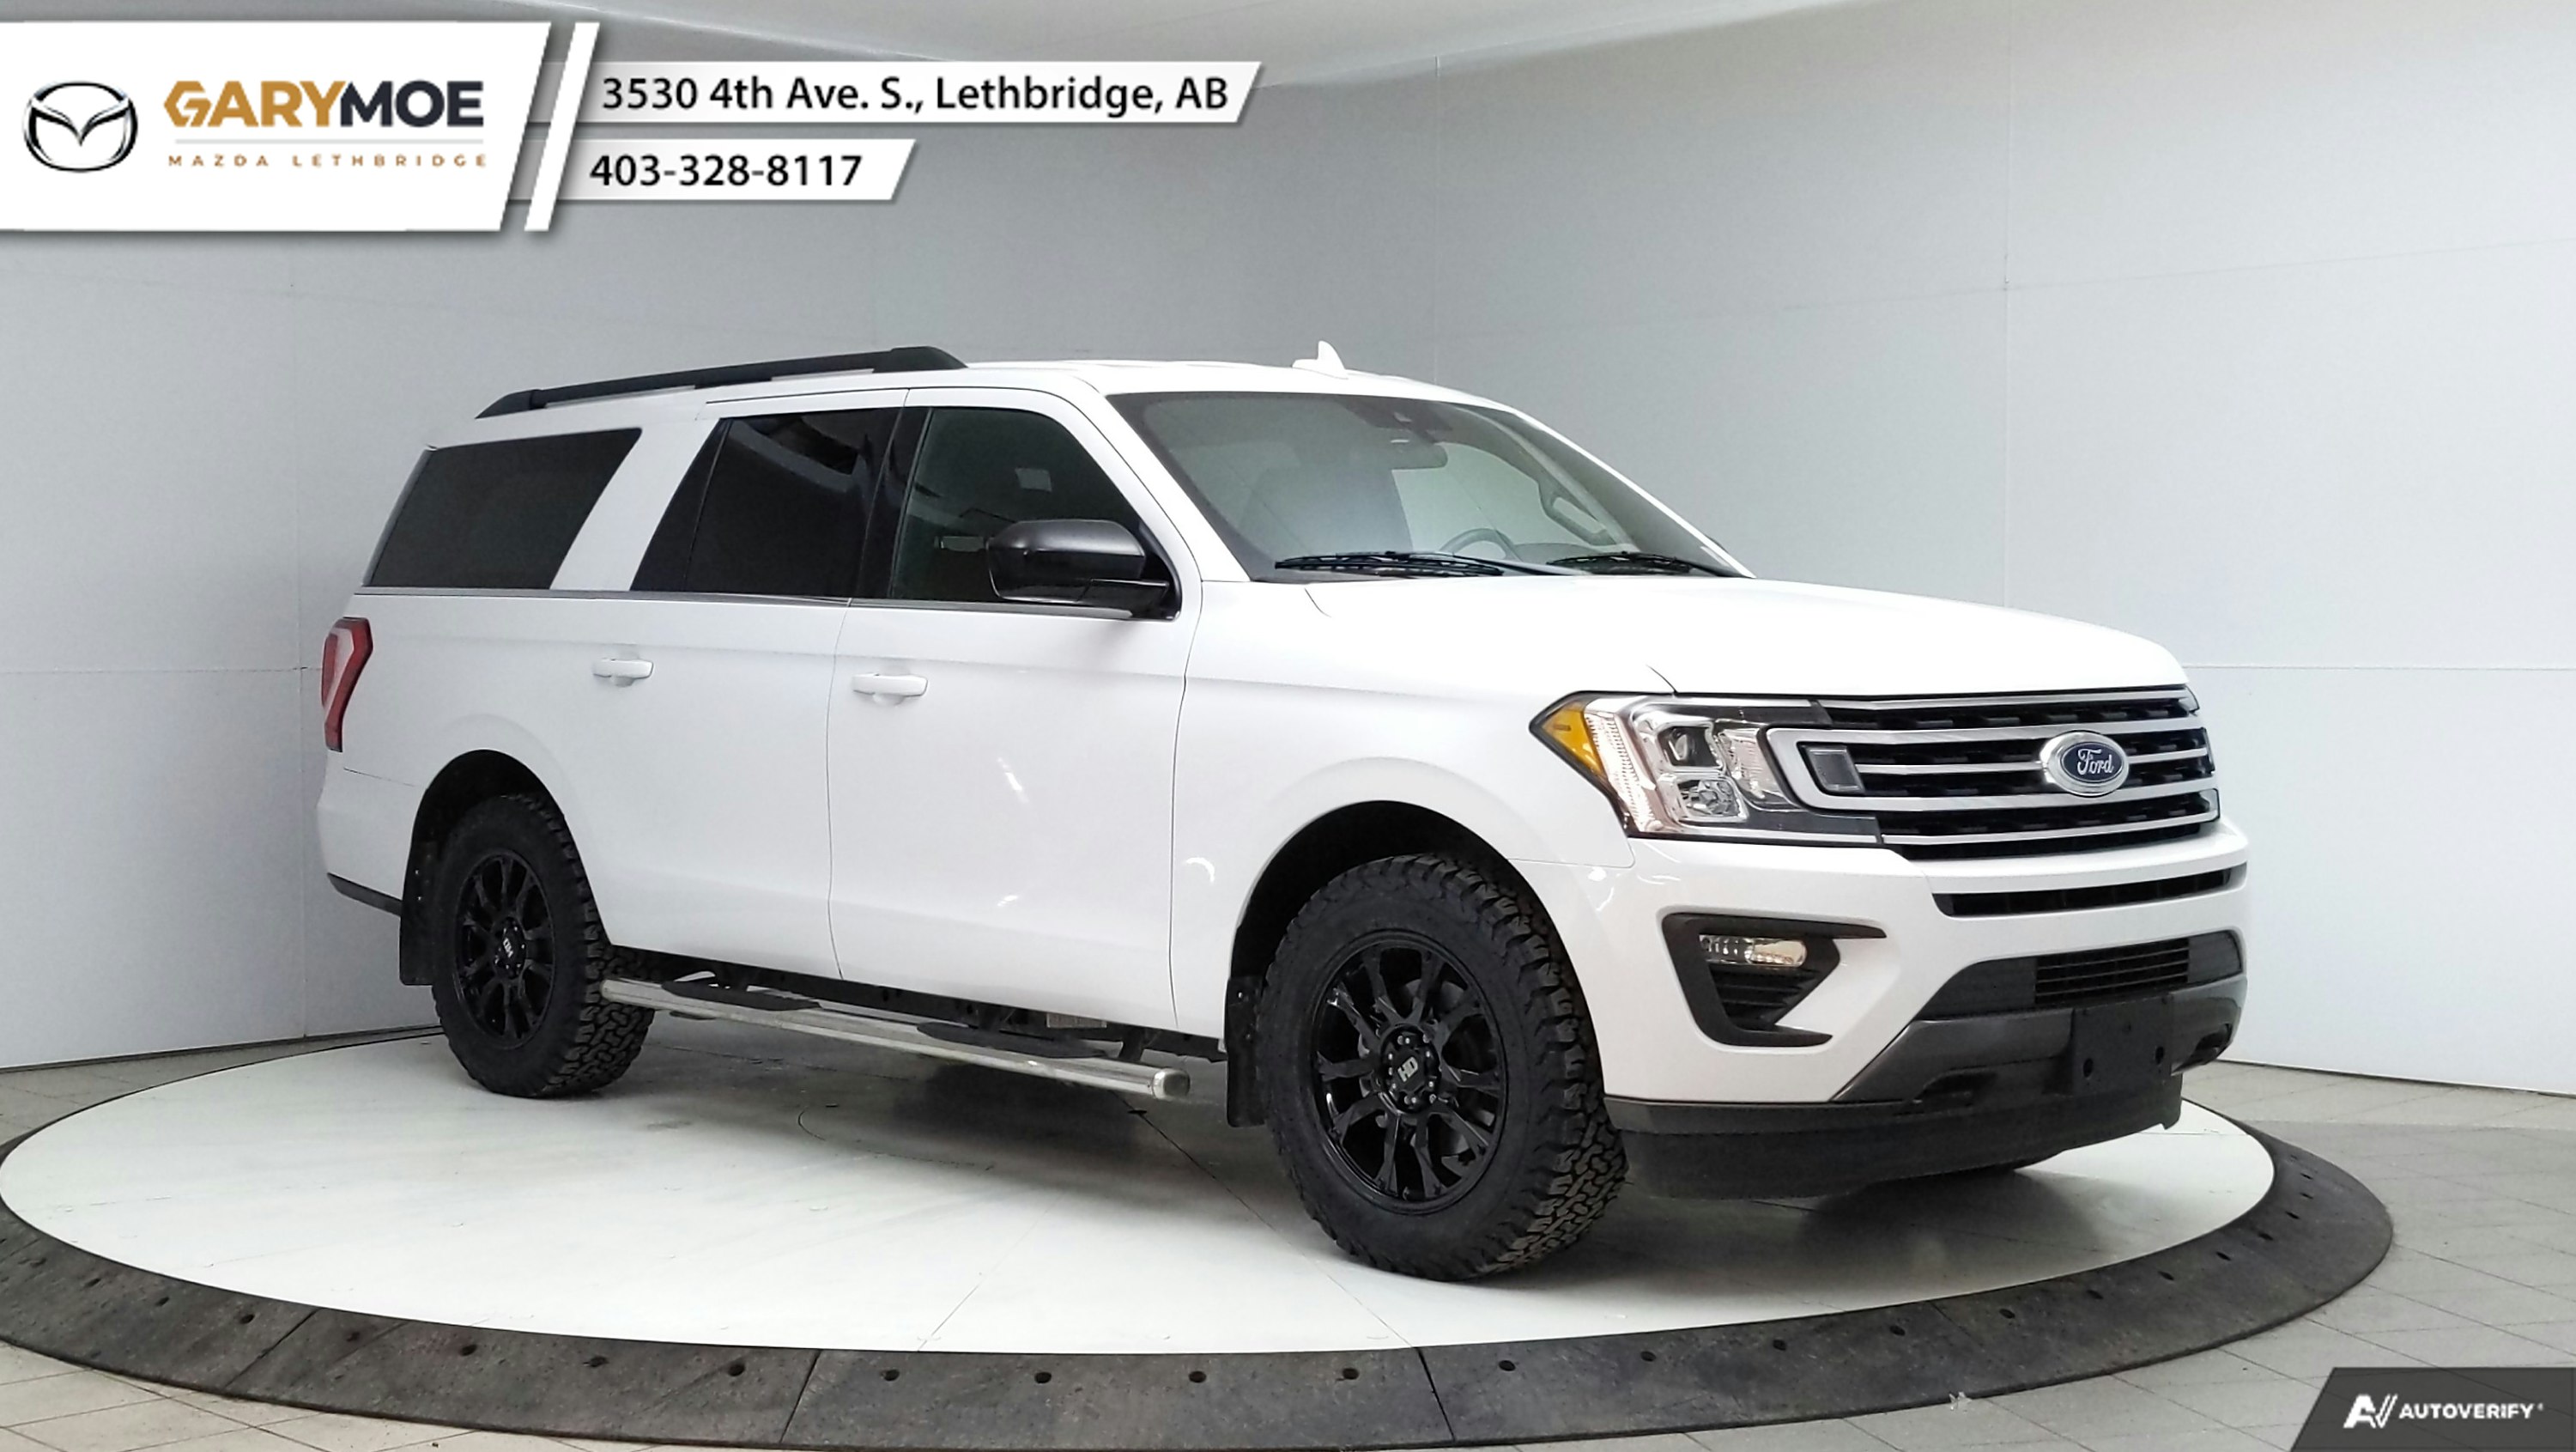 2021 Ford Expedition SSV Max (5 Seat Only) (Stk: ML1369) in Lethbridge - Image 1 of 34